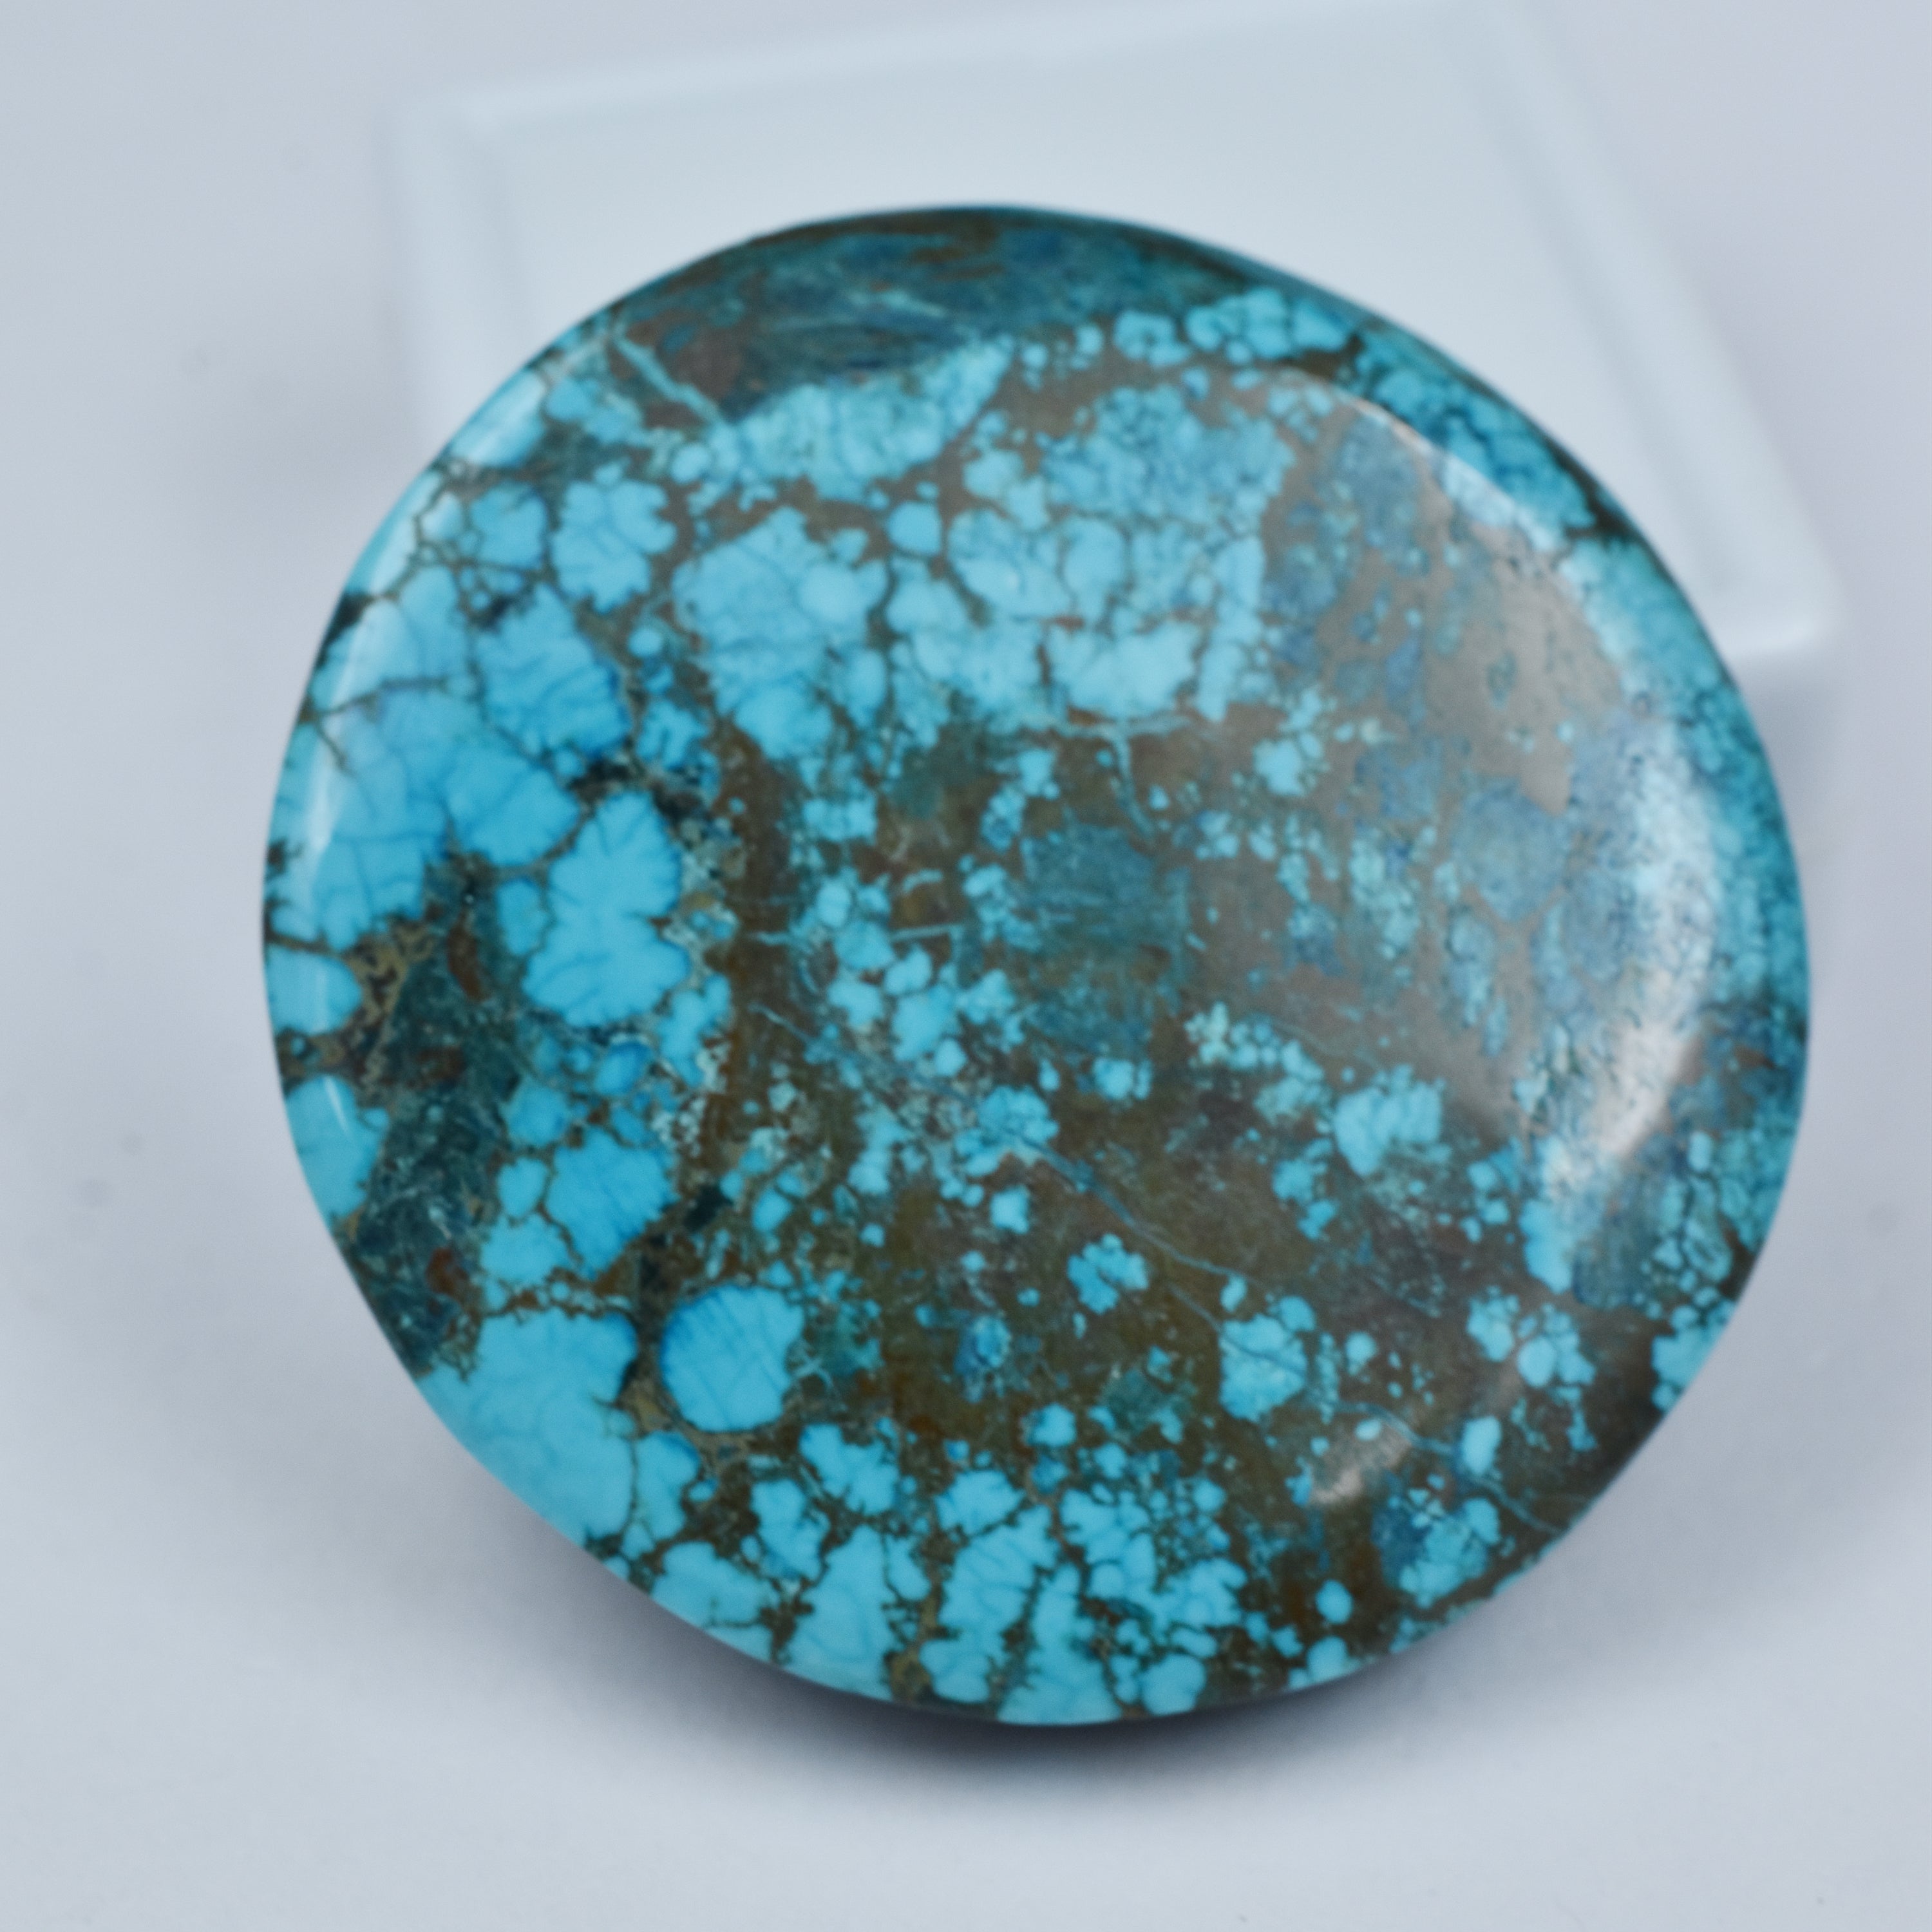 Blue Turquoise 26.35 Carat Round Shape CERTIFIED Natural Loose Gemstone , Turquoise Slab Stone | Free Delivery Free Gift | Biggest Offer